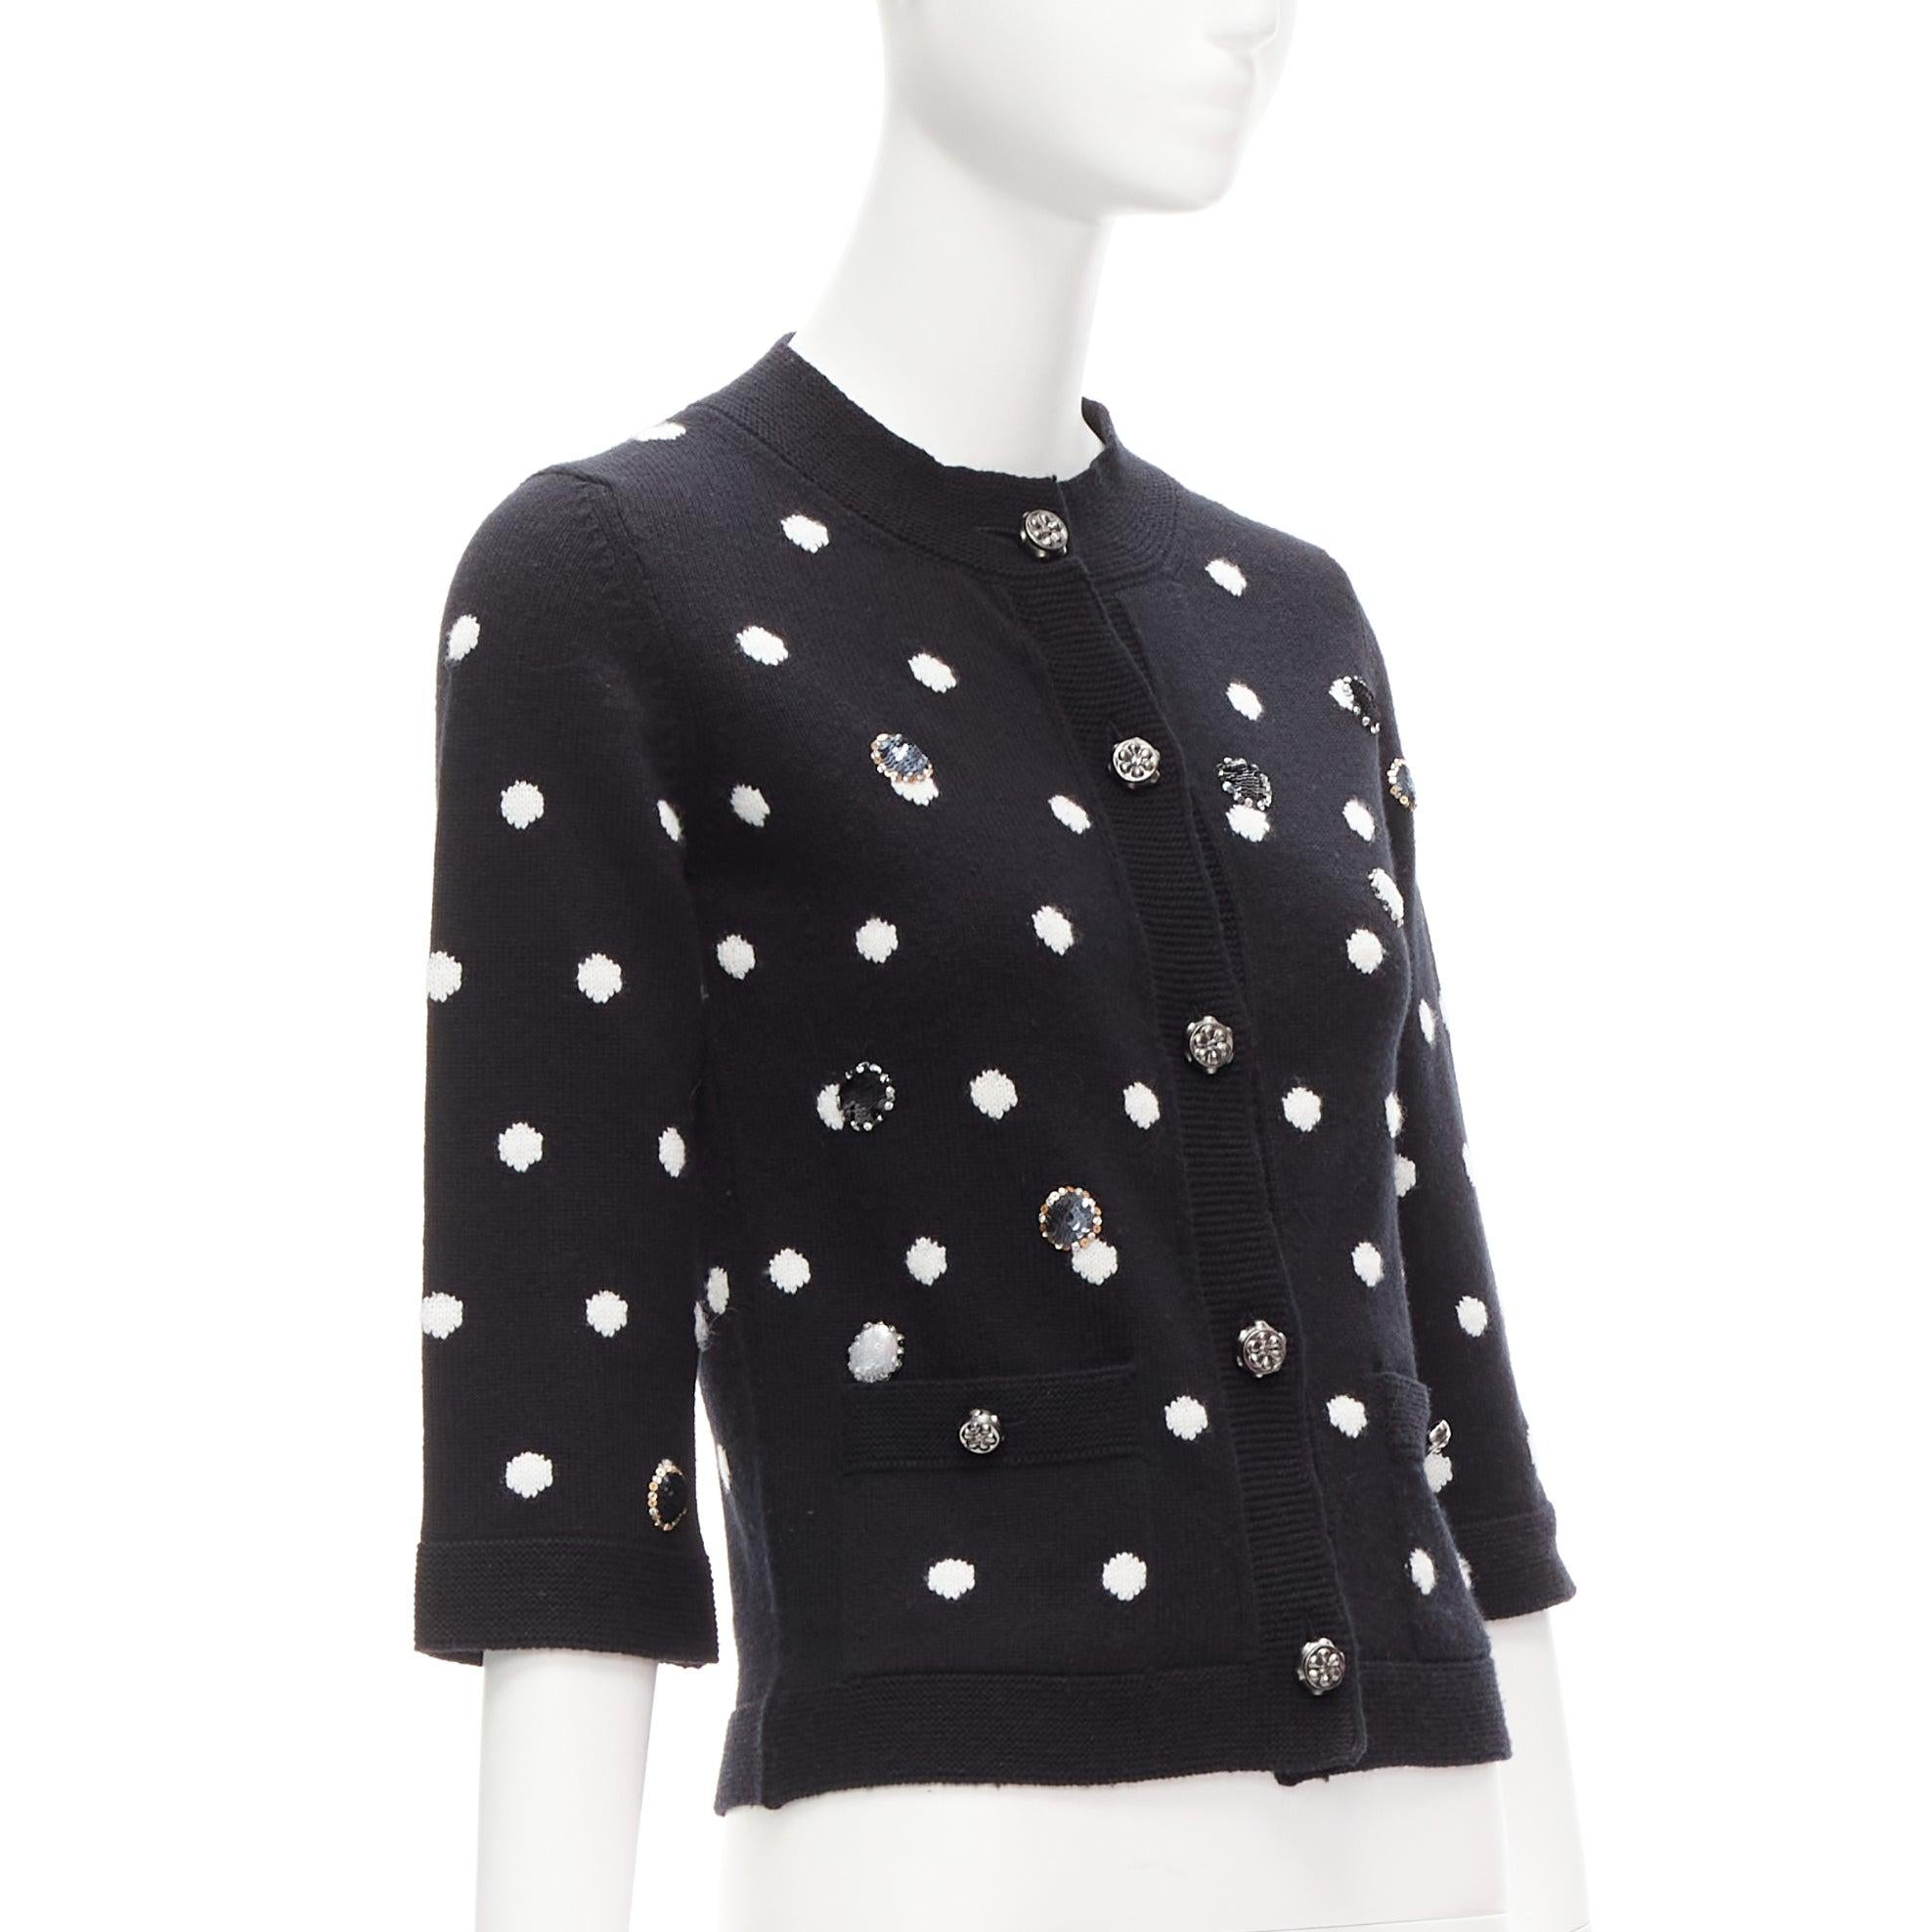 CHANEL 08A 100% cashmere silver embellished black polka dot cardigan FR34 XS
Reference: TGAS/D00895
Brand: Chanel
Designer: Karl Lagerfeld
Collection: 08A
Material: Cashmere
Color: White, Black
Pattern: Polka Dot
Closure: Button
Extra Details: